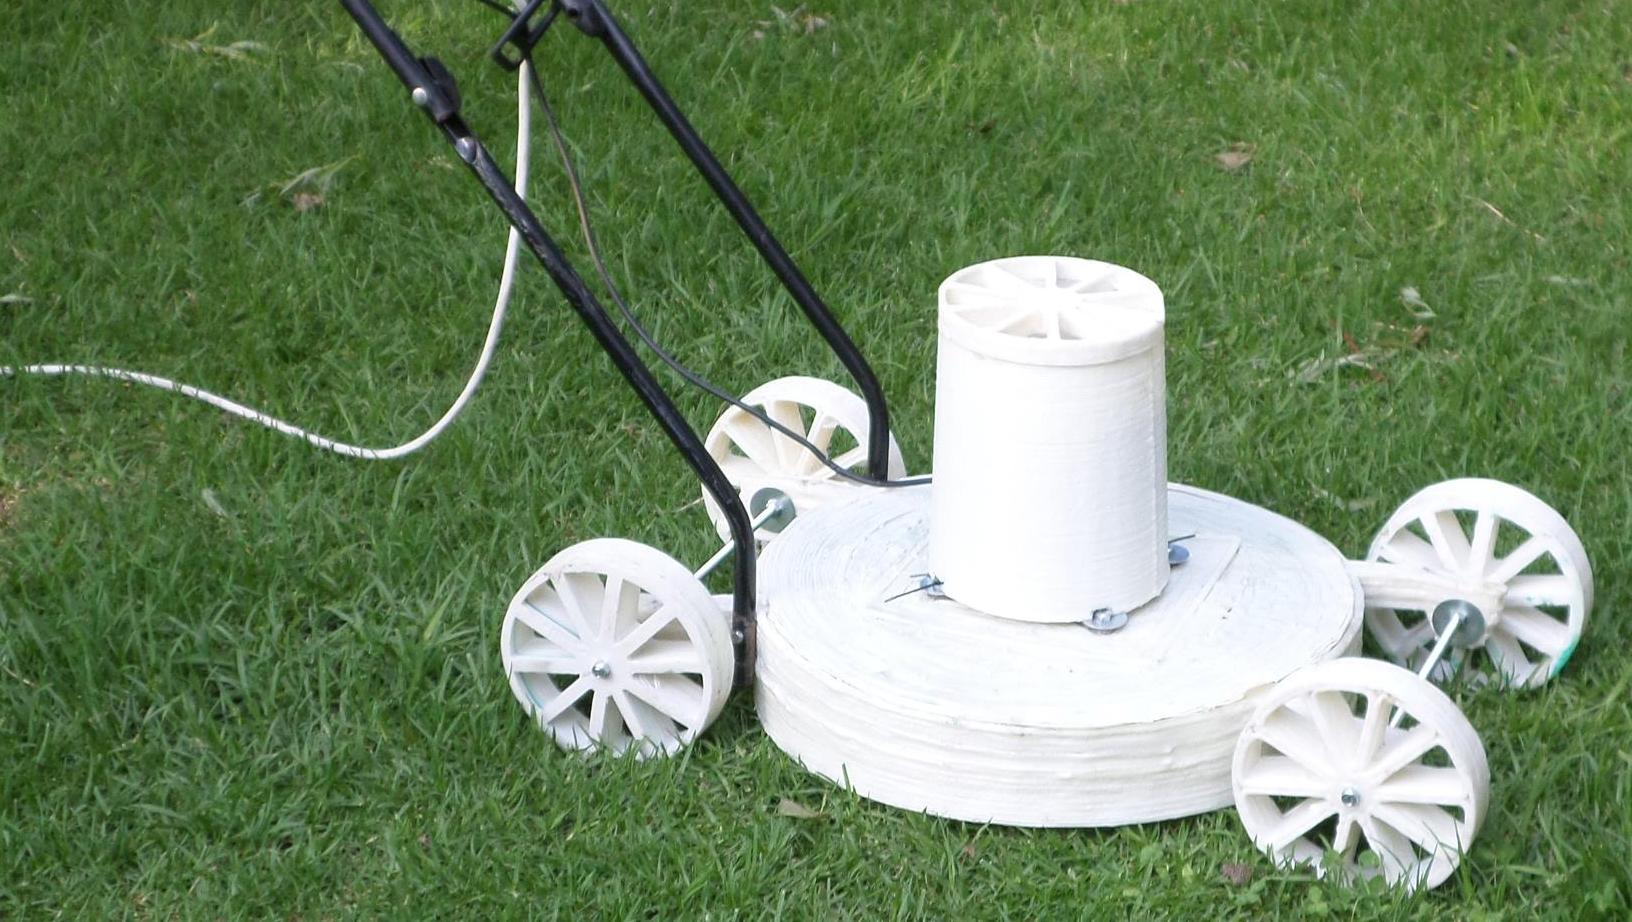 3D-Printed Lawn Mower That Works? This Guy Churned Out All The Parts In Only 9 Hours!